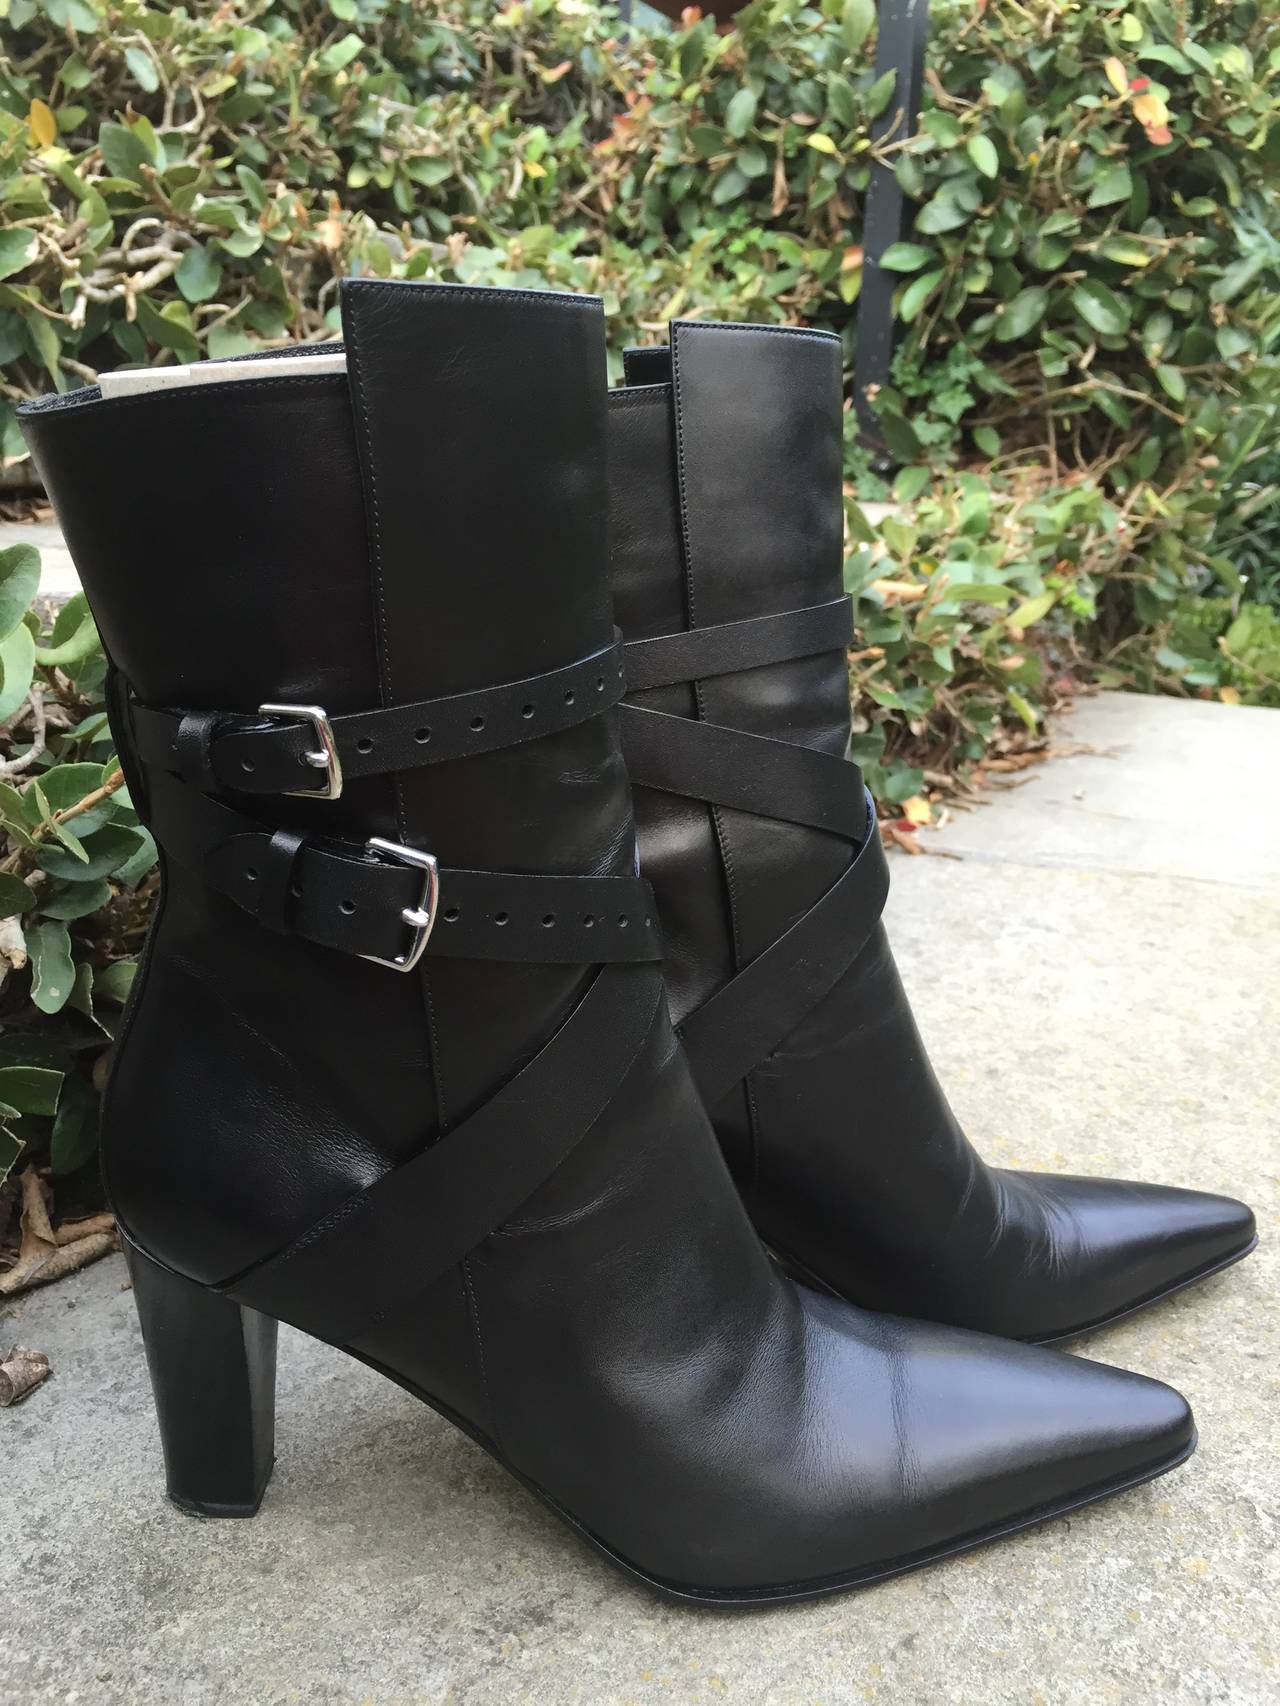 Gorgeous black leather boots with buckle straps from Hermes circa JPG.
Sz 39
Worn once, in excellent condition in Hermes box.